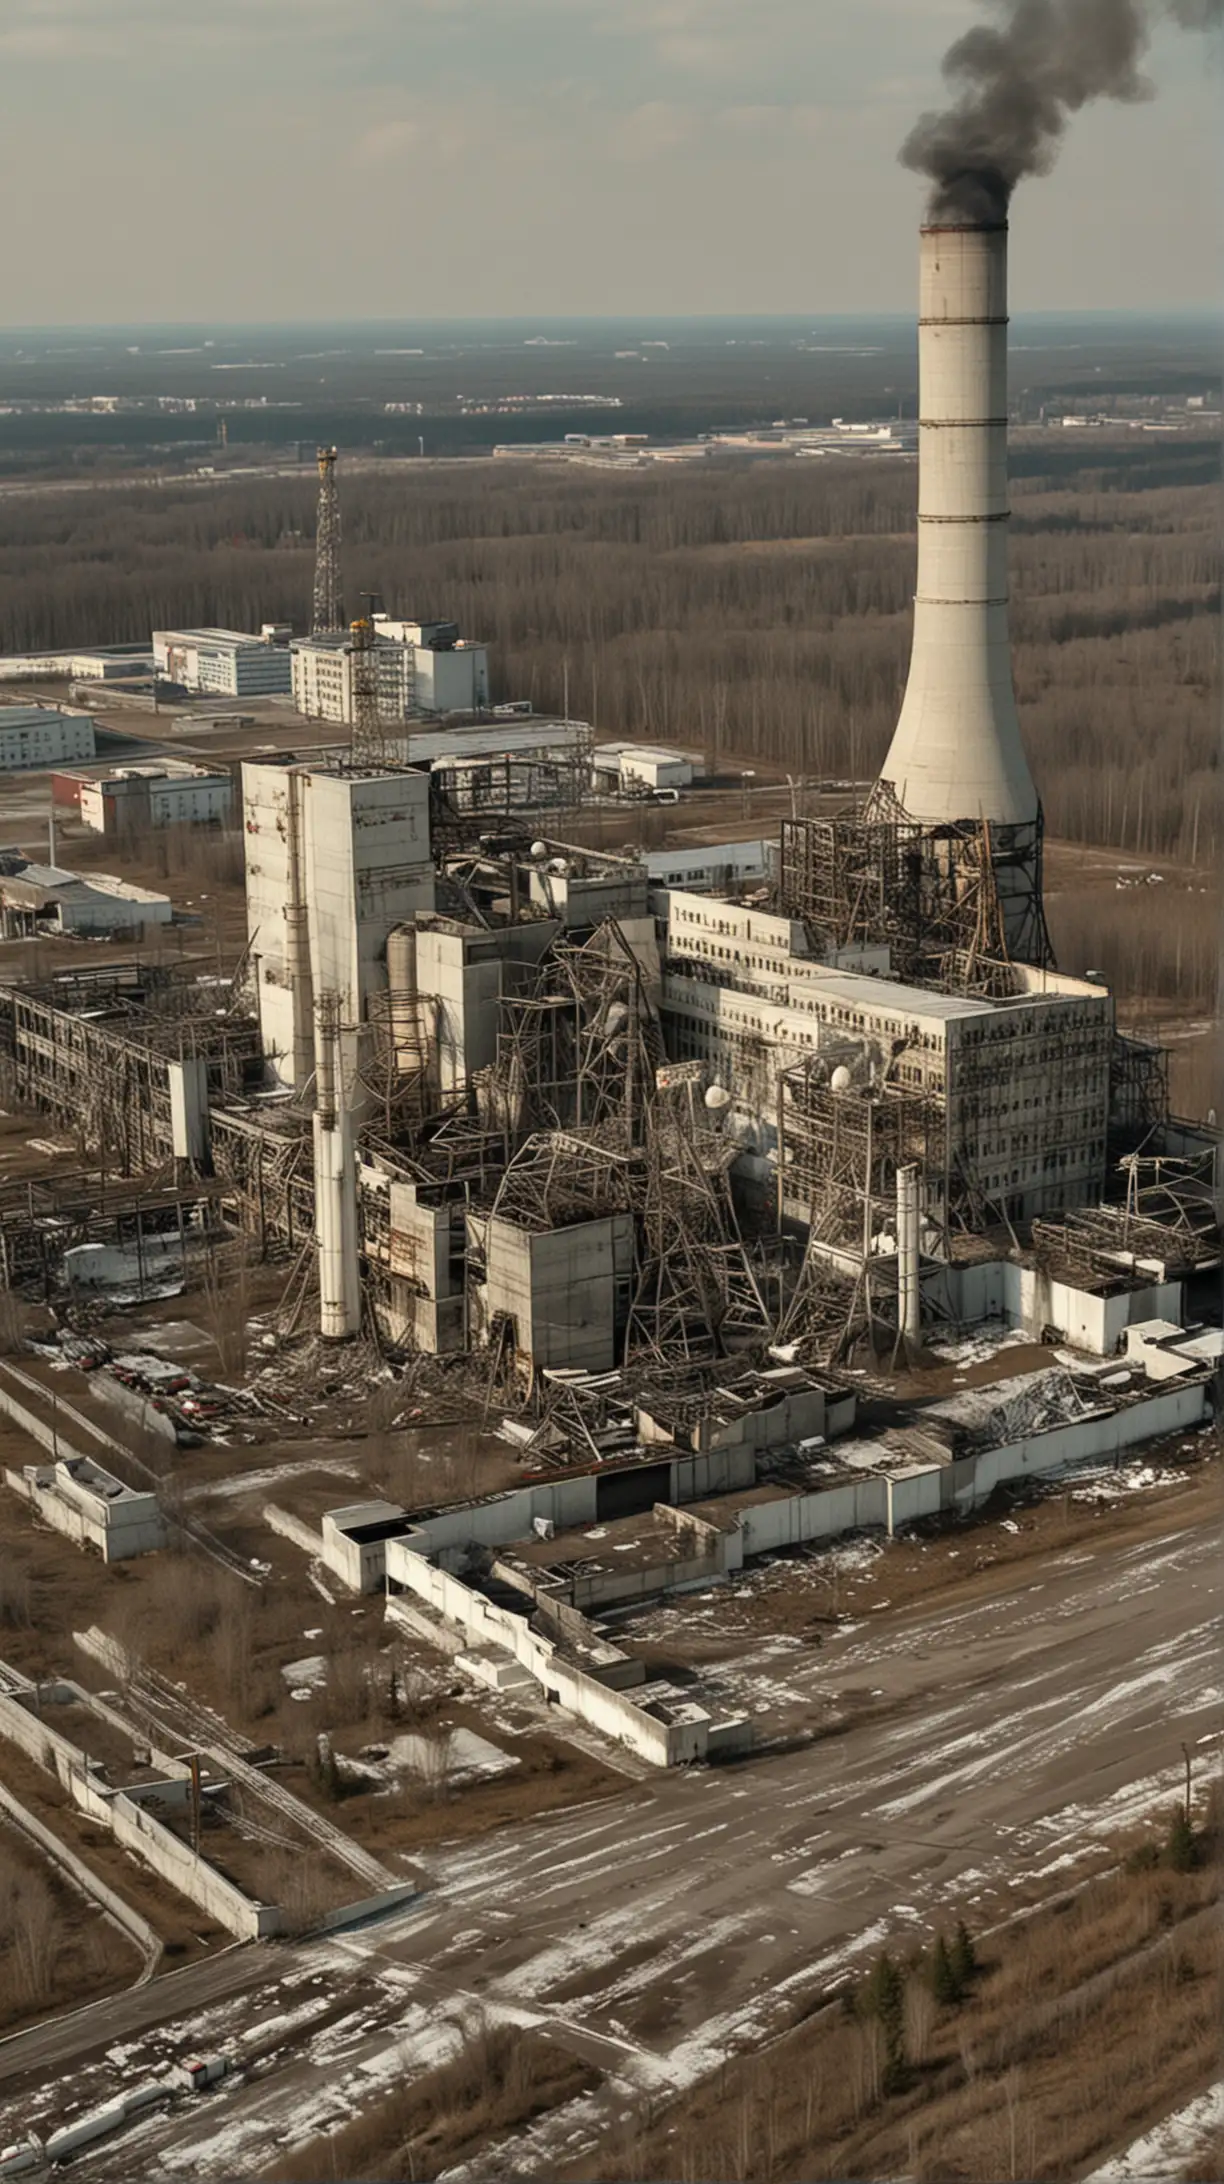 Chernobyl Lessons Learned Scientists and Policymakers Discussing Nuclear Safety